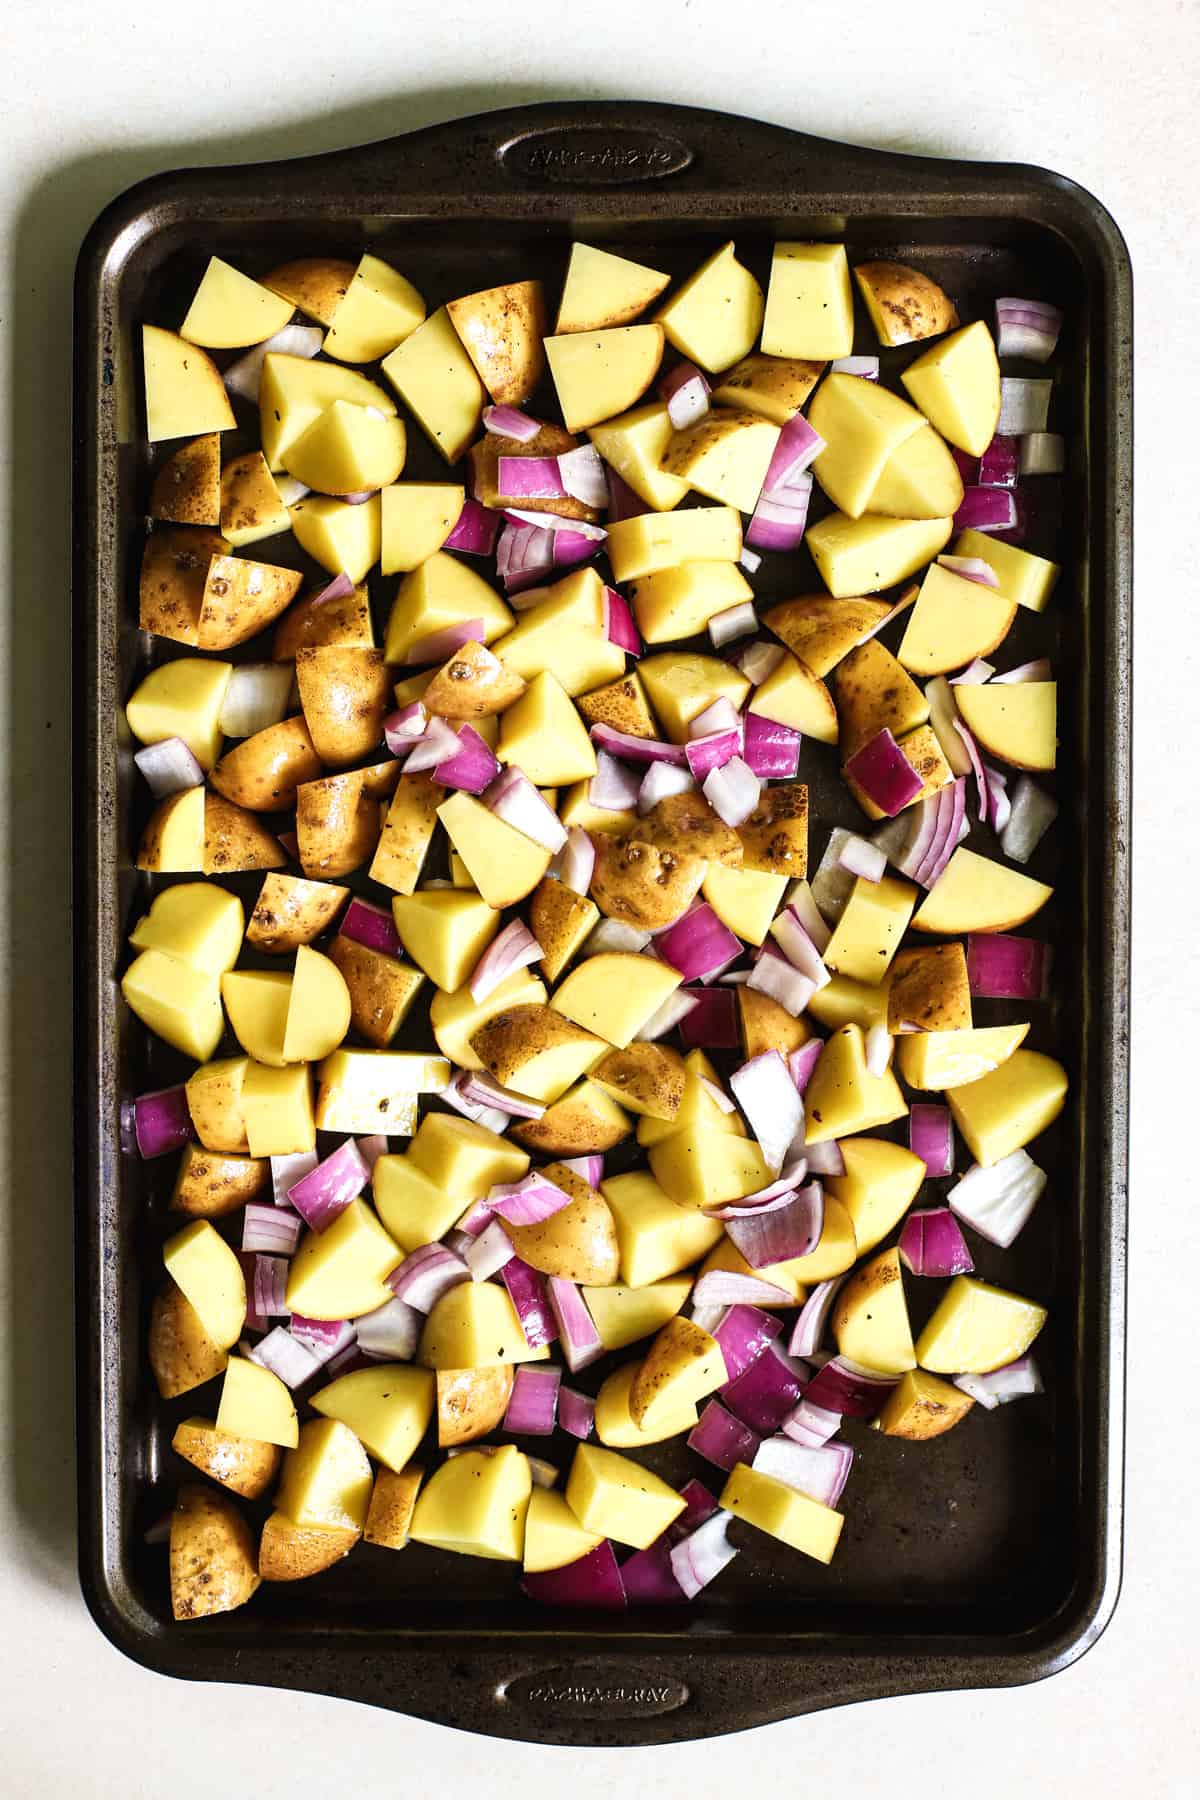 Potatoes and red onions diced large and coated in olive oil, salt, and pepper, on baking sheet